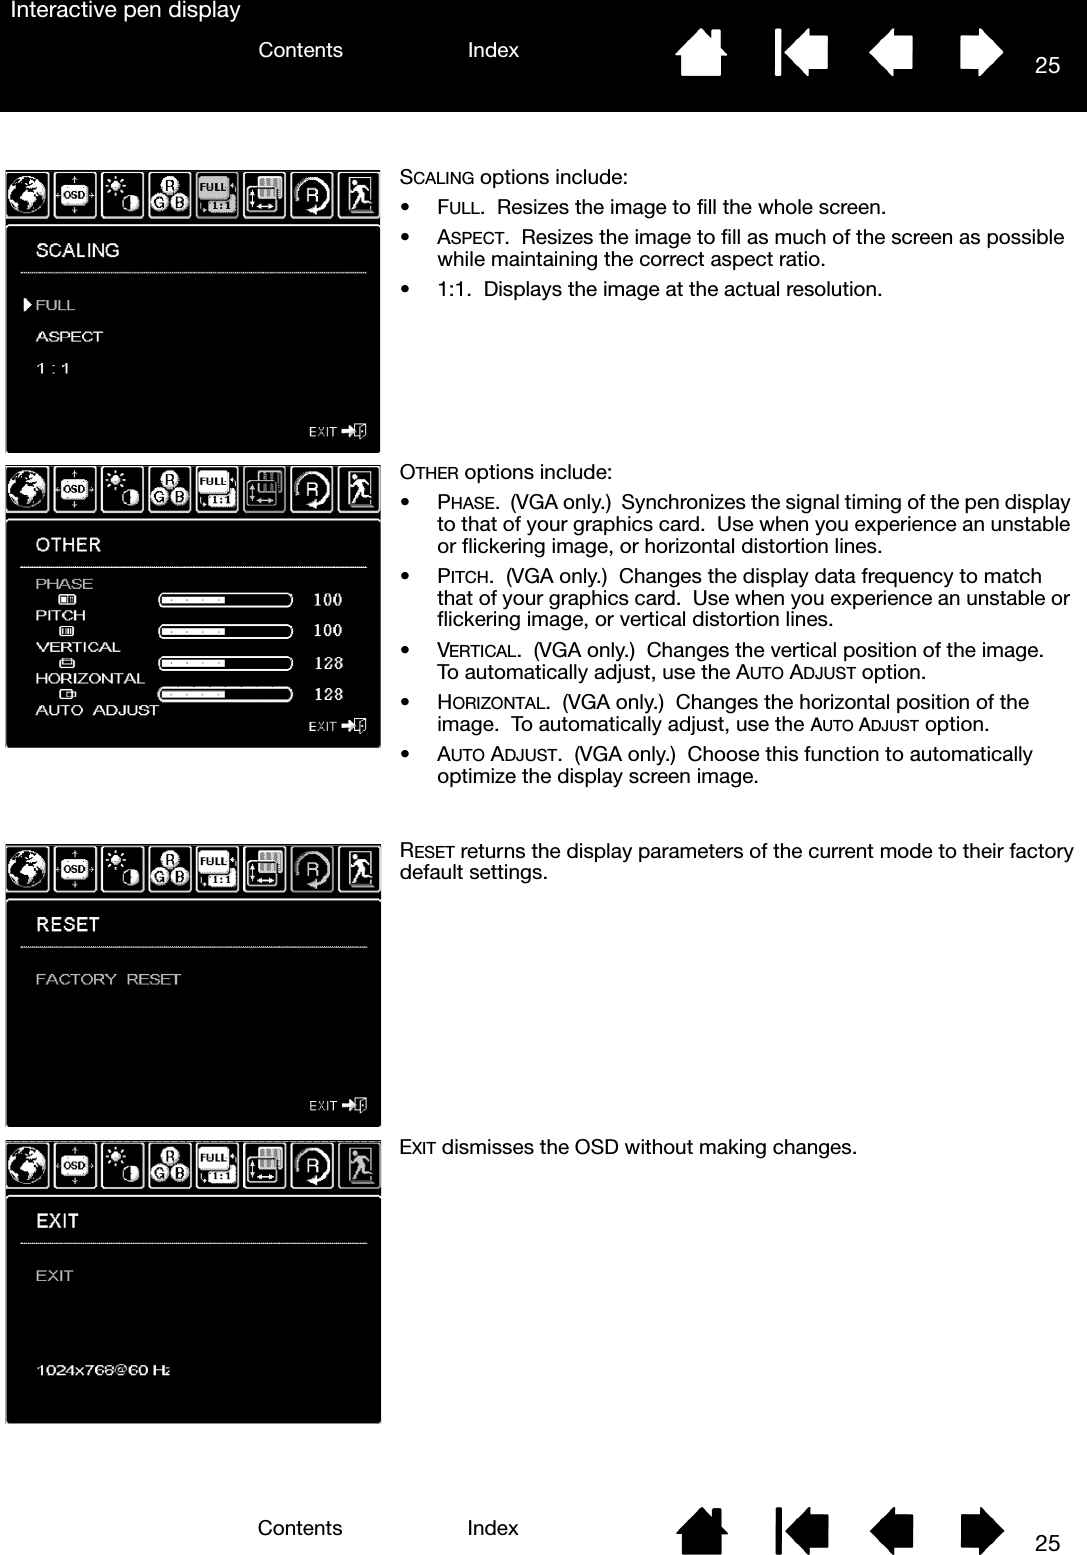 25IndexContents25IndexContentsInteractive pen displaySCALING options include:•FULL.  Resizes the image to fill the whole screen.•ASPECT.  Resizes the image to fill as much of the screen as possible while maintaining the correct aspect ratio.• 1:1.  Displays the image at the actual resolution.OTHER options include:•PHASE.  (VGA only.)  Synchronizes the signal timing of the pen display to that of your graphics card.  Use when you experience an unstable or flickering image, or horizontal distortion lines.•PITCH.  (VGA only.)  Changes the display data frequency to match that of your graphics card.  Use when you experience an unstable or flickering image, or vertical distortion lines.•VERTICAL.  (VGA only.)  Changes the vertical position of the image.  To automatically adjust, use the AUTO ADJUST option.•HORIZONTAL.  (VGA only.)  Changes the horizontal position of the image.  To automatically adjust, use the AUTO ADJUST option.•AUTO ADJUST.  (VGA only.)  Choose this function to automatically optimize the display screen image.RESET returns the display parameters of the current mode to their factory default settings.EXIT dismisses the OSD without making changes.